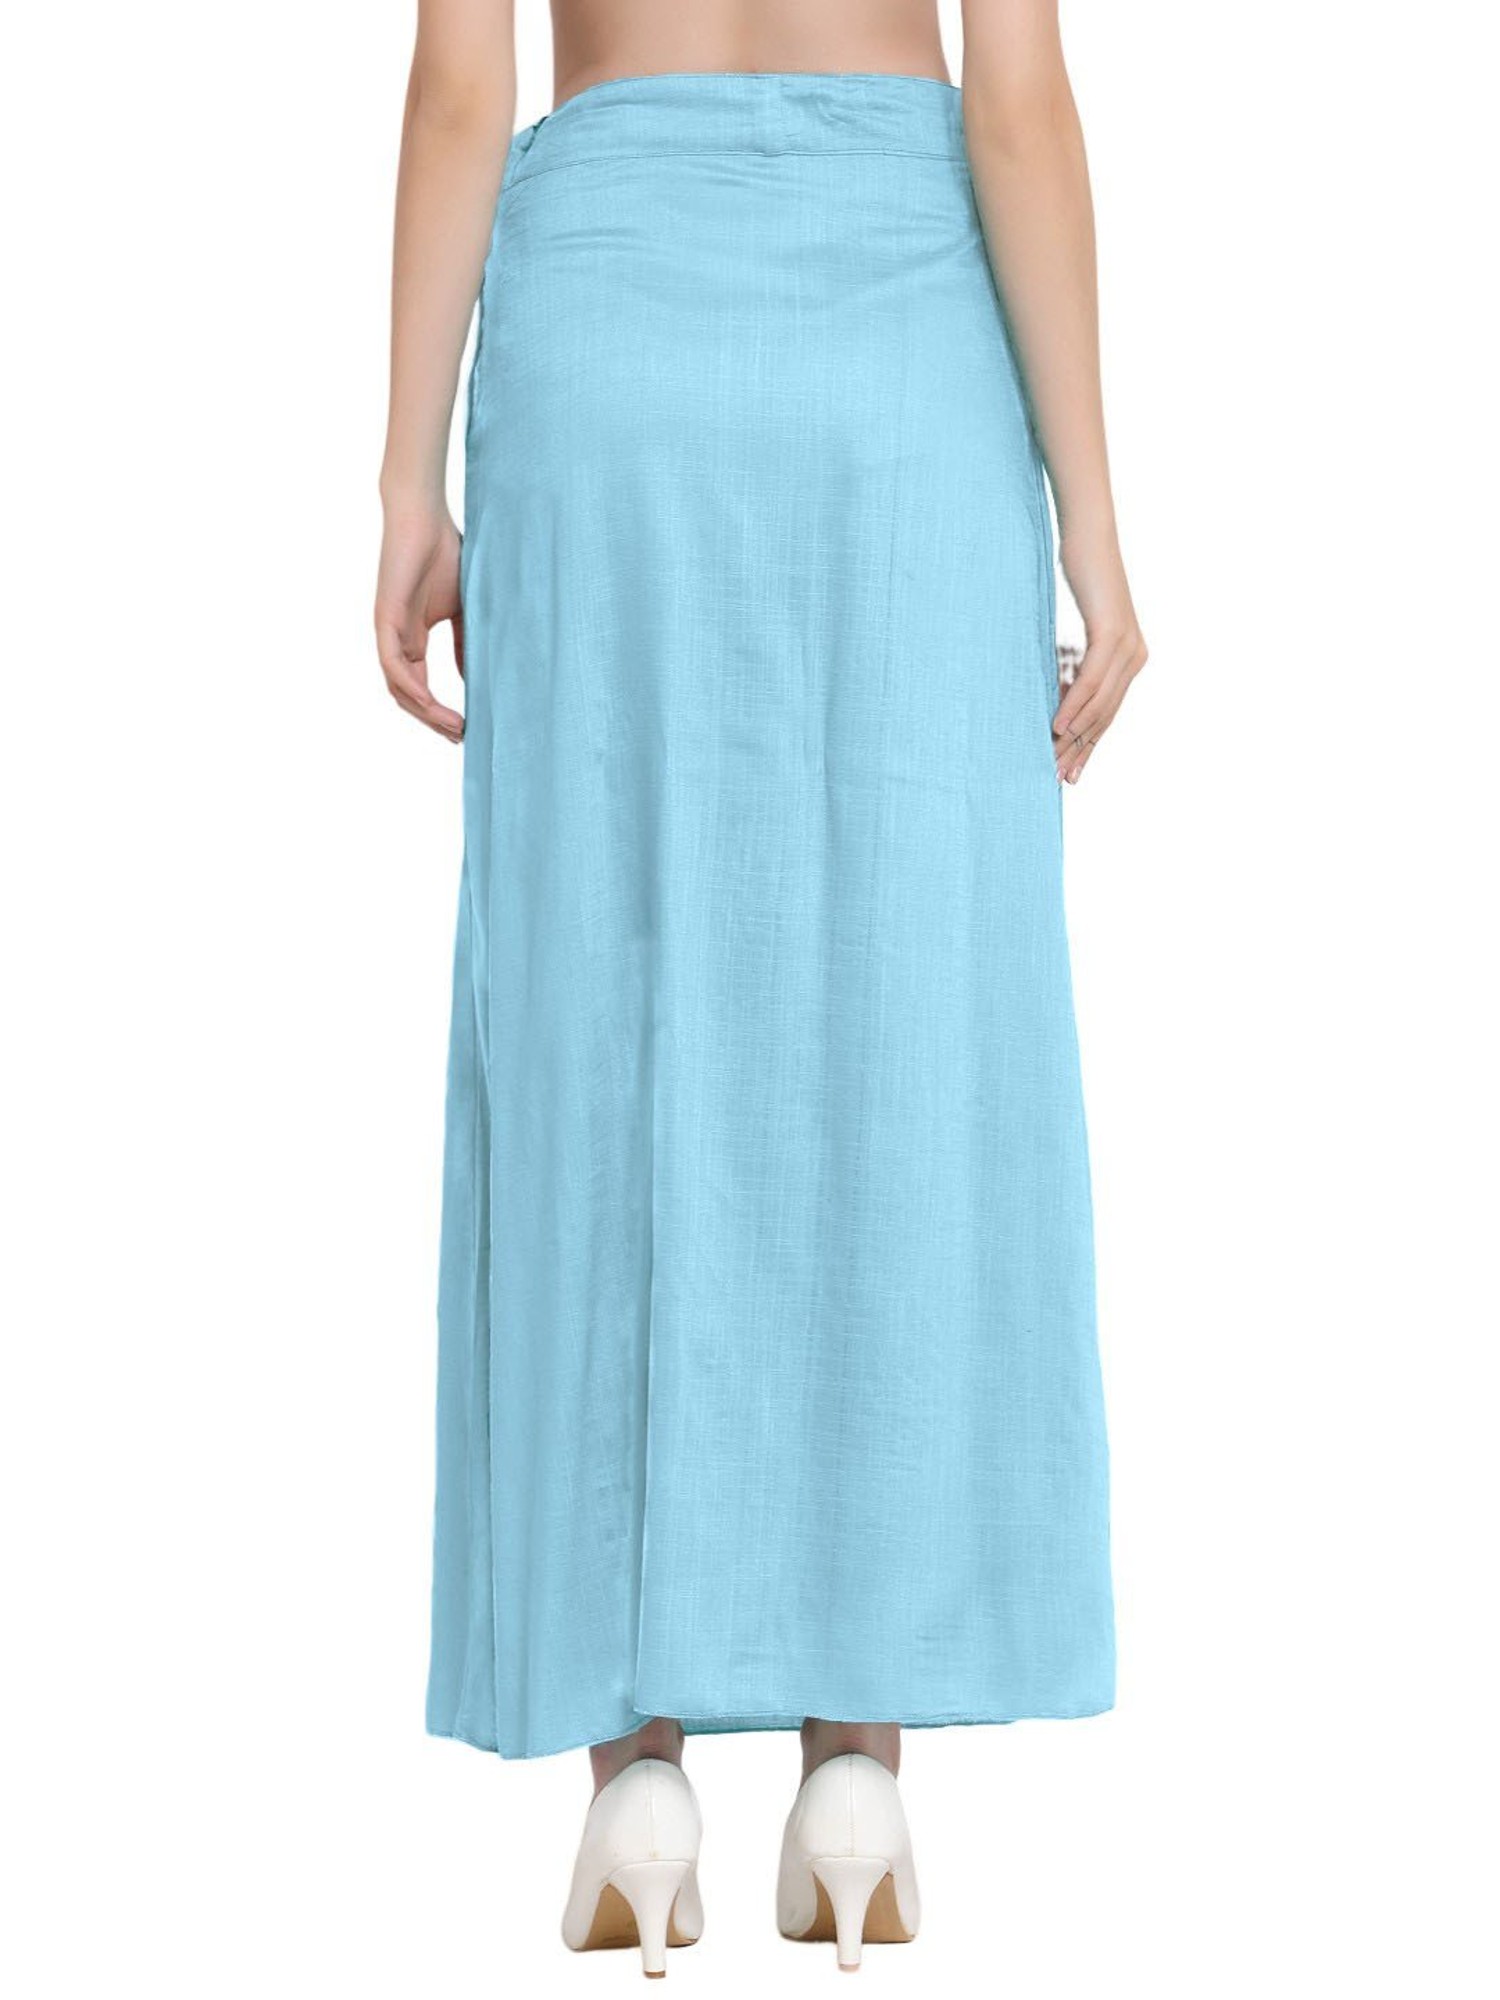 Discover more than 193 blue maxi skirt